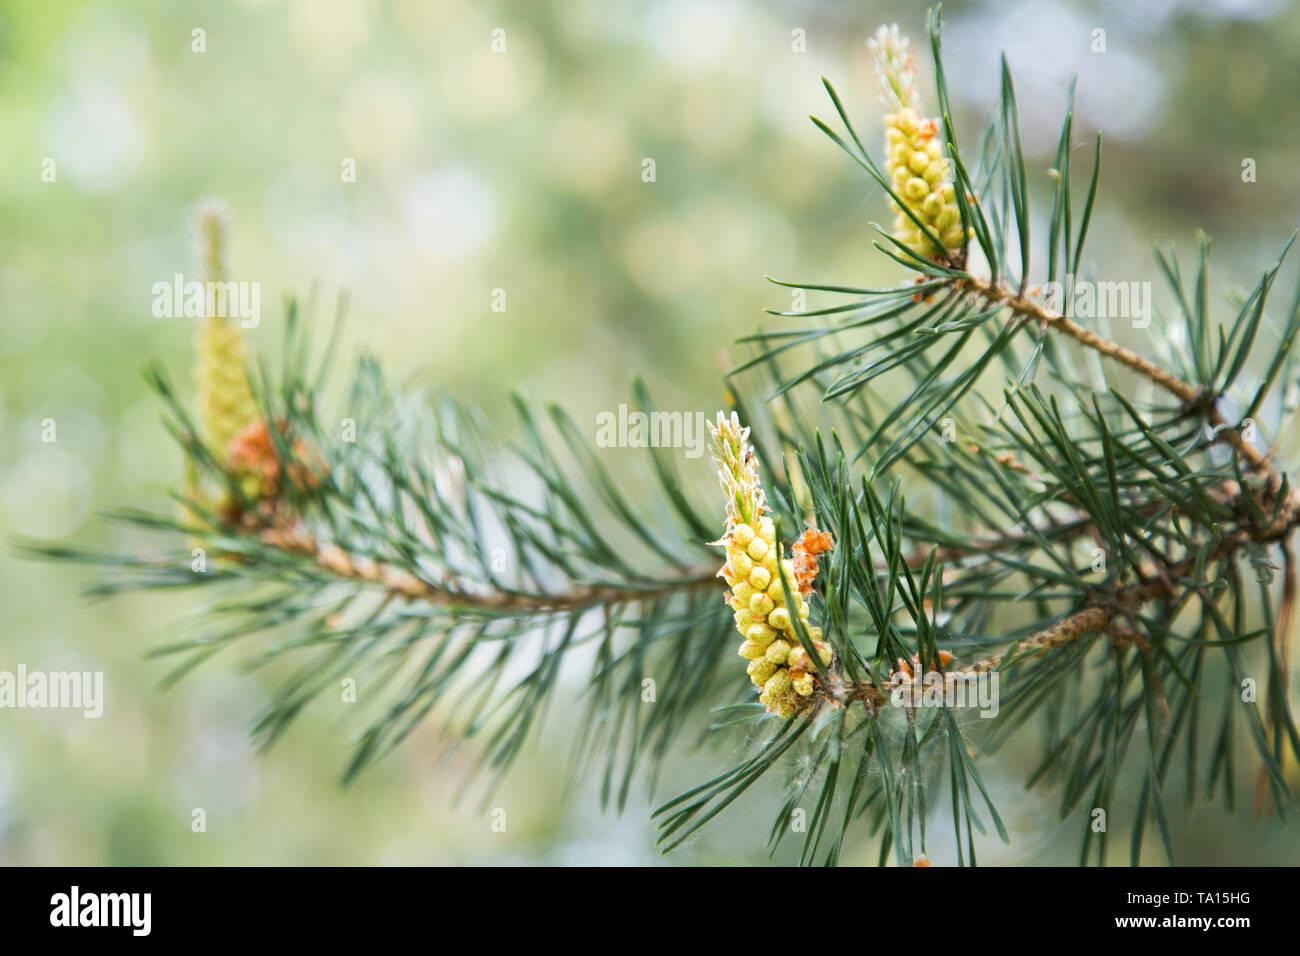 young pine cones on a tree in the spring afternoon Stock Photo